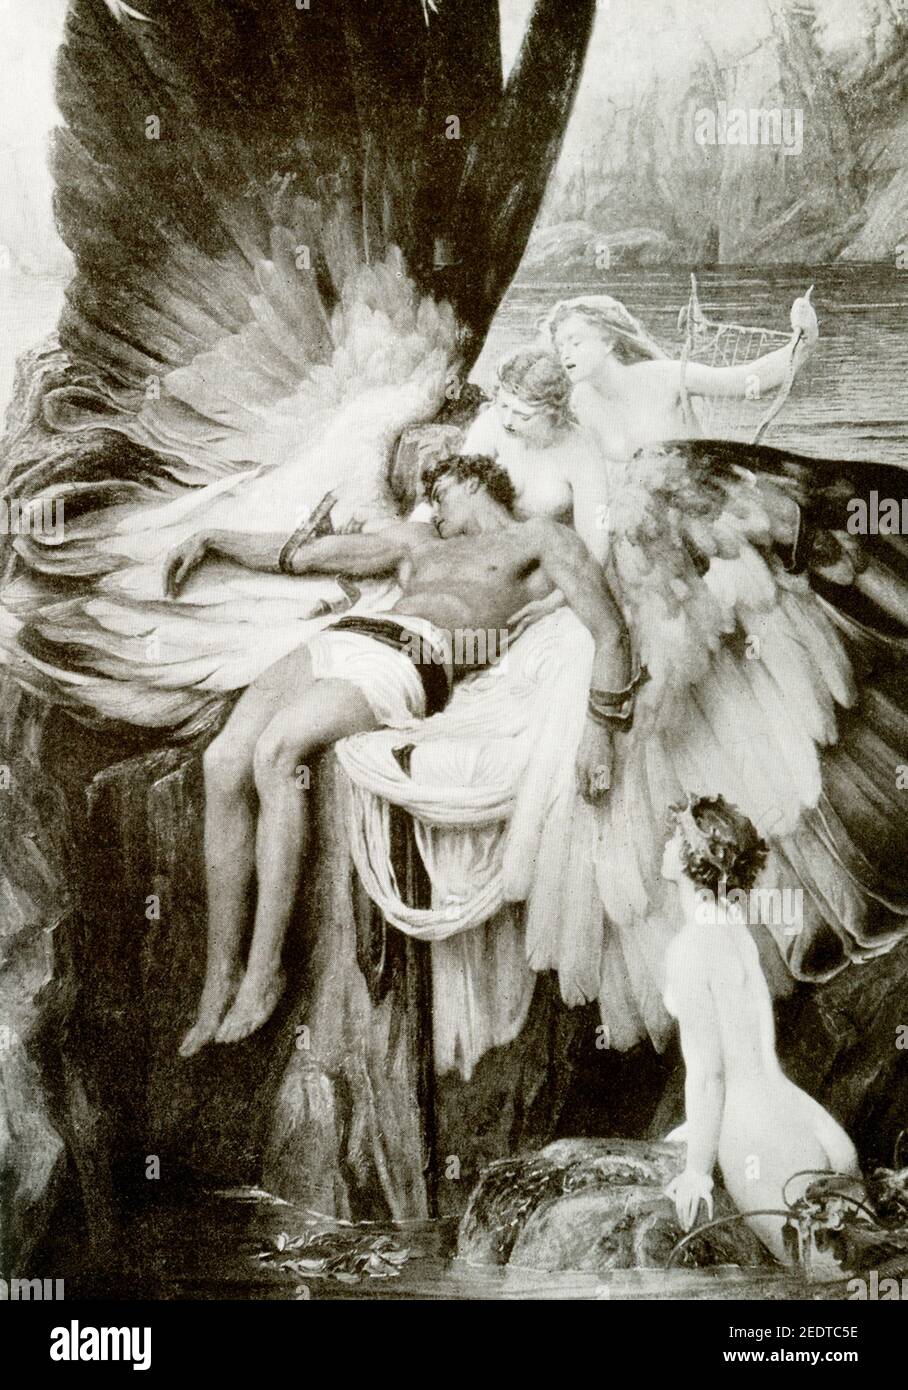 This painting, titled Lament for Icarus, was painted by Herbert J Draper in 1898. It shows the dead Icarus, surrounded by lamenting nymphs. The wings of Icarus are based on the bird-of-paradise pattern. In Greek mythology, Daedalus was the builder of the labyrinth at Knossos in Crete (designed to keep the Minotaur within). To escape his confinement on the island by the king, he designed wings of wax and feathers for himself and his son, Icarus (here). But, Icarus flew too close to the sun. The wax melted, and he fell into the sea (name after the Icarian sea). Daedalus made it to Sicily, where Stock Photo